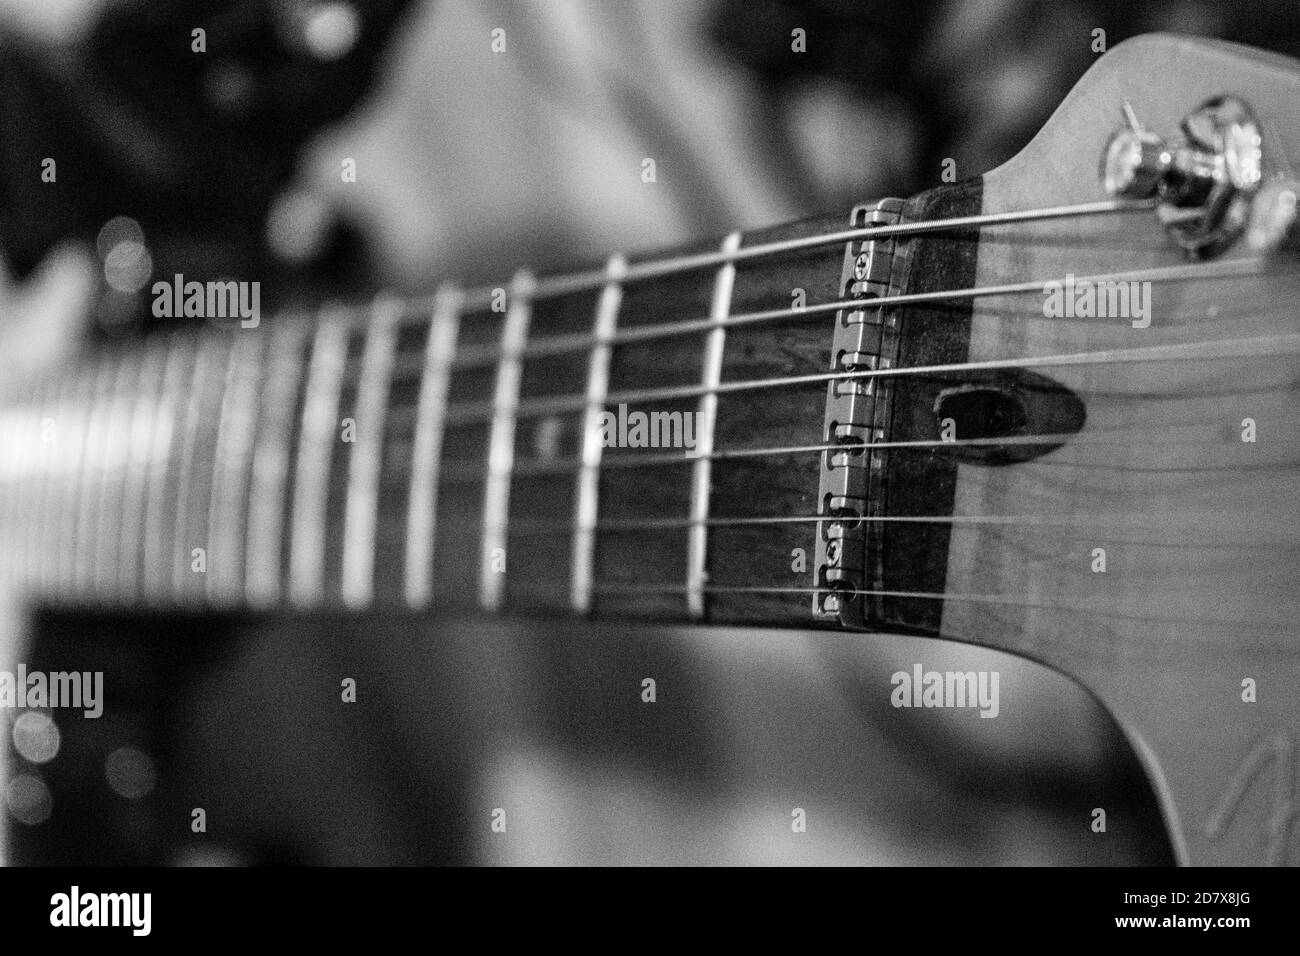 looking down electric guitar neck and strings Stock Photo